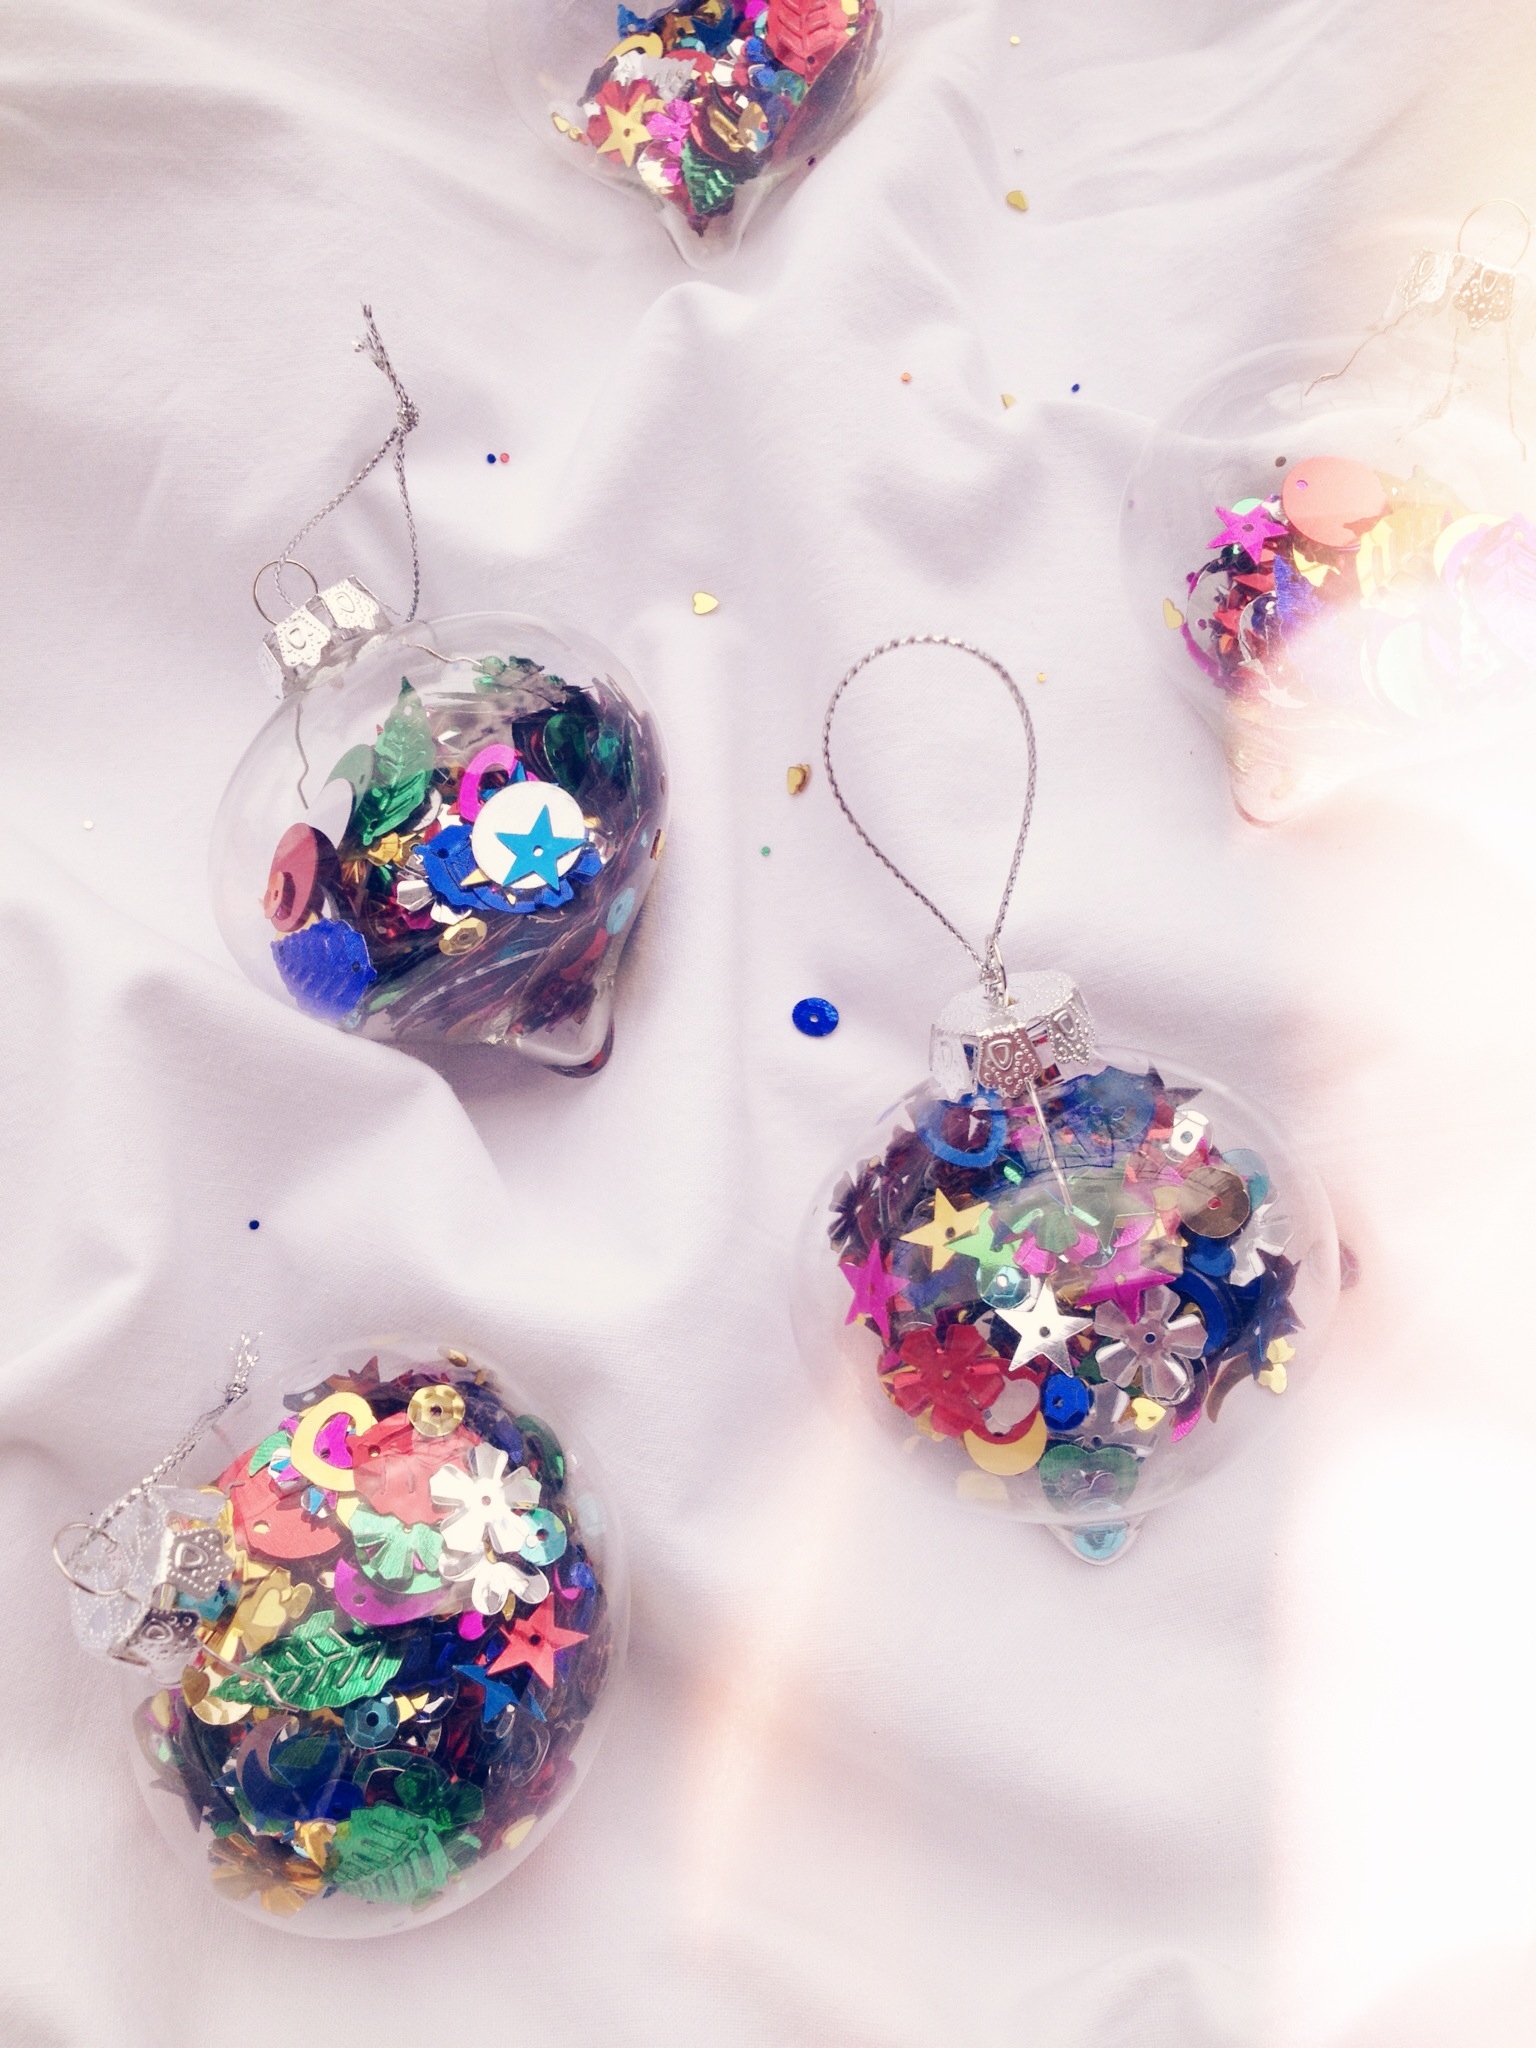 beautiful home made ornaments